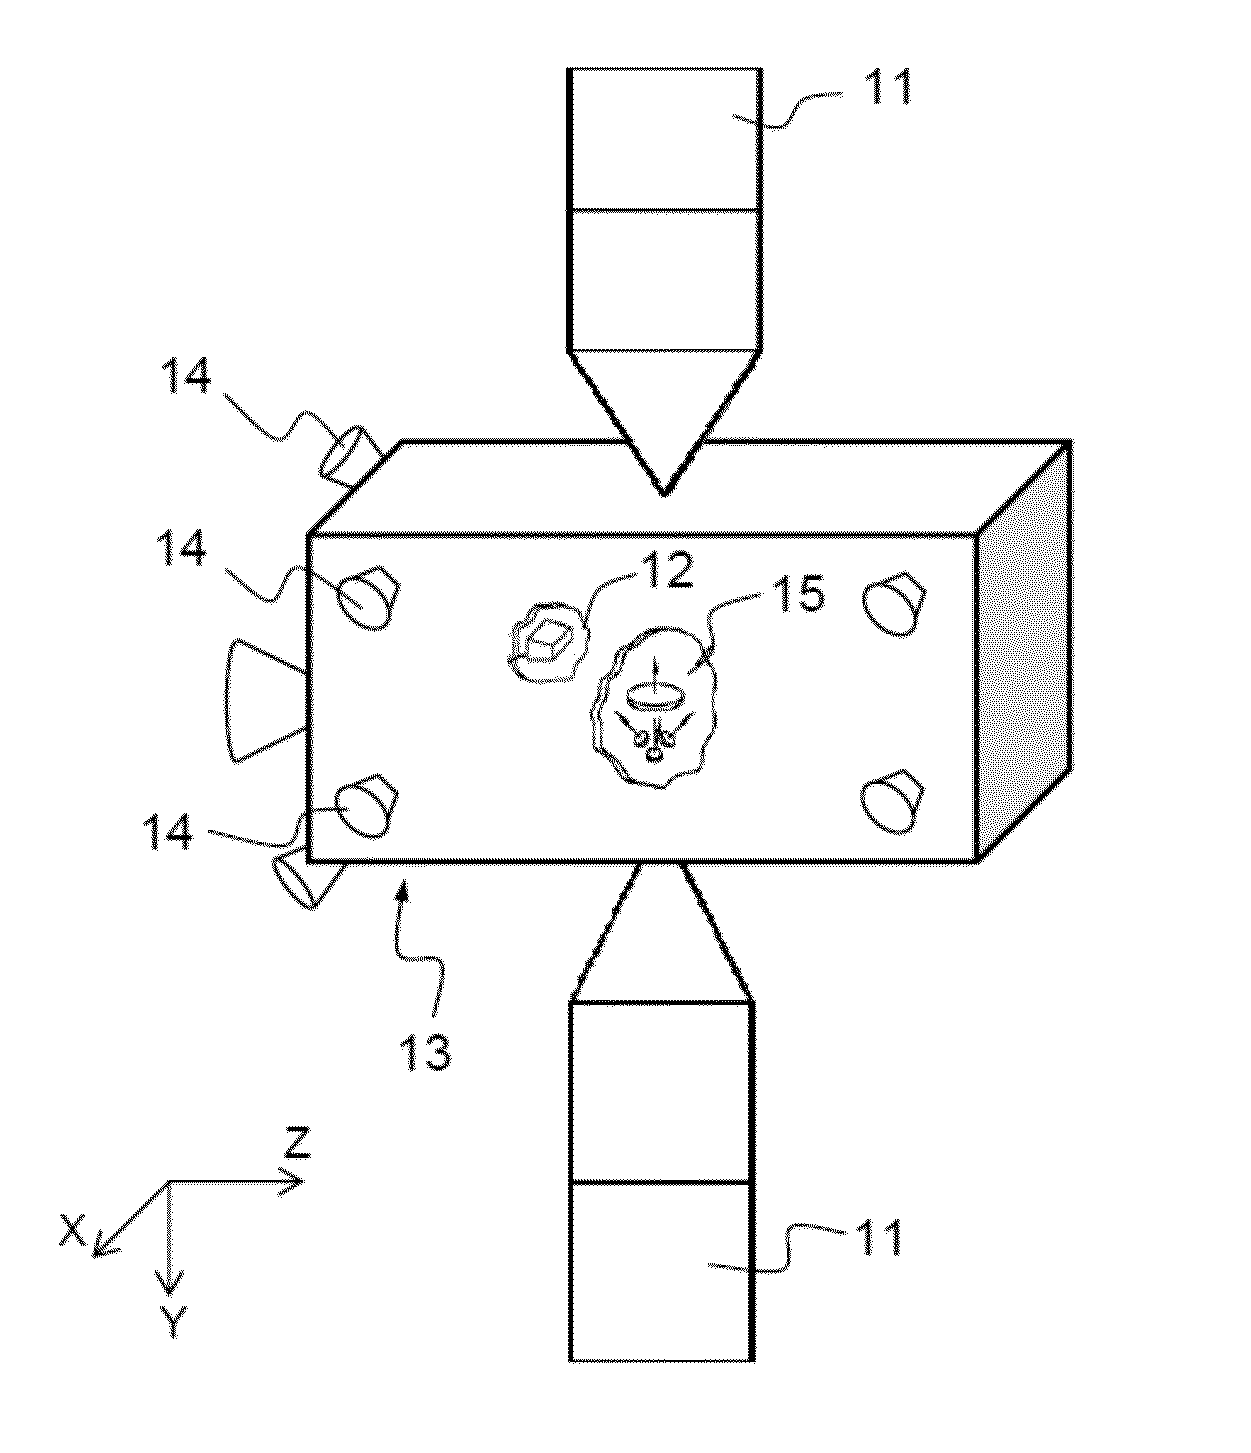 Method For Reducing the Angular Momentum and Controlling the Attitude of a Spacecraft